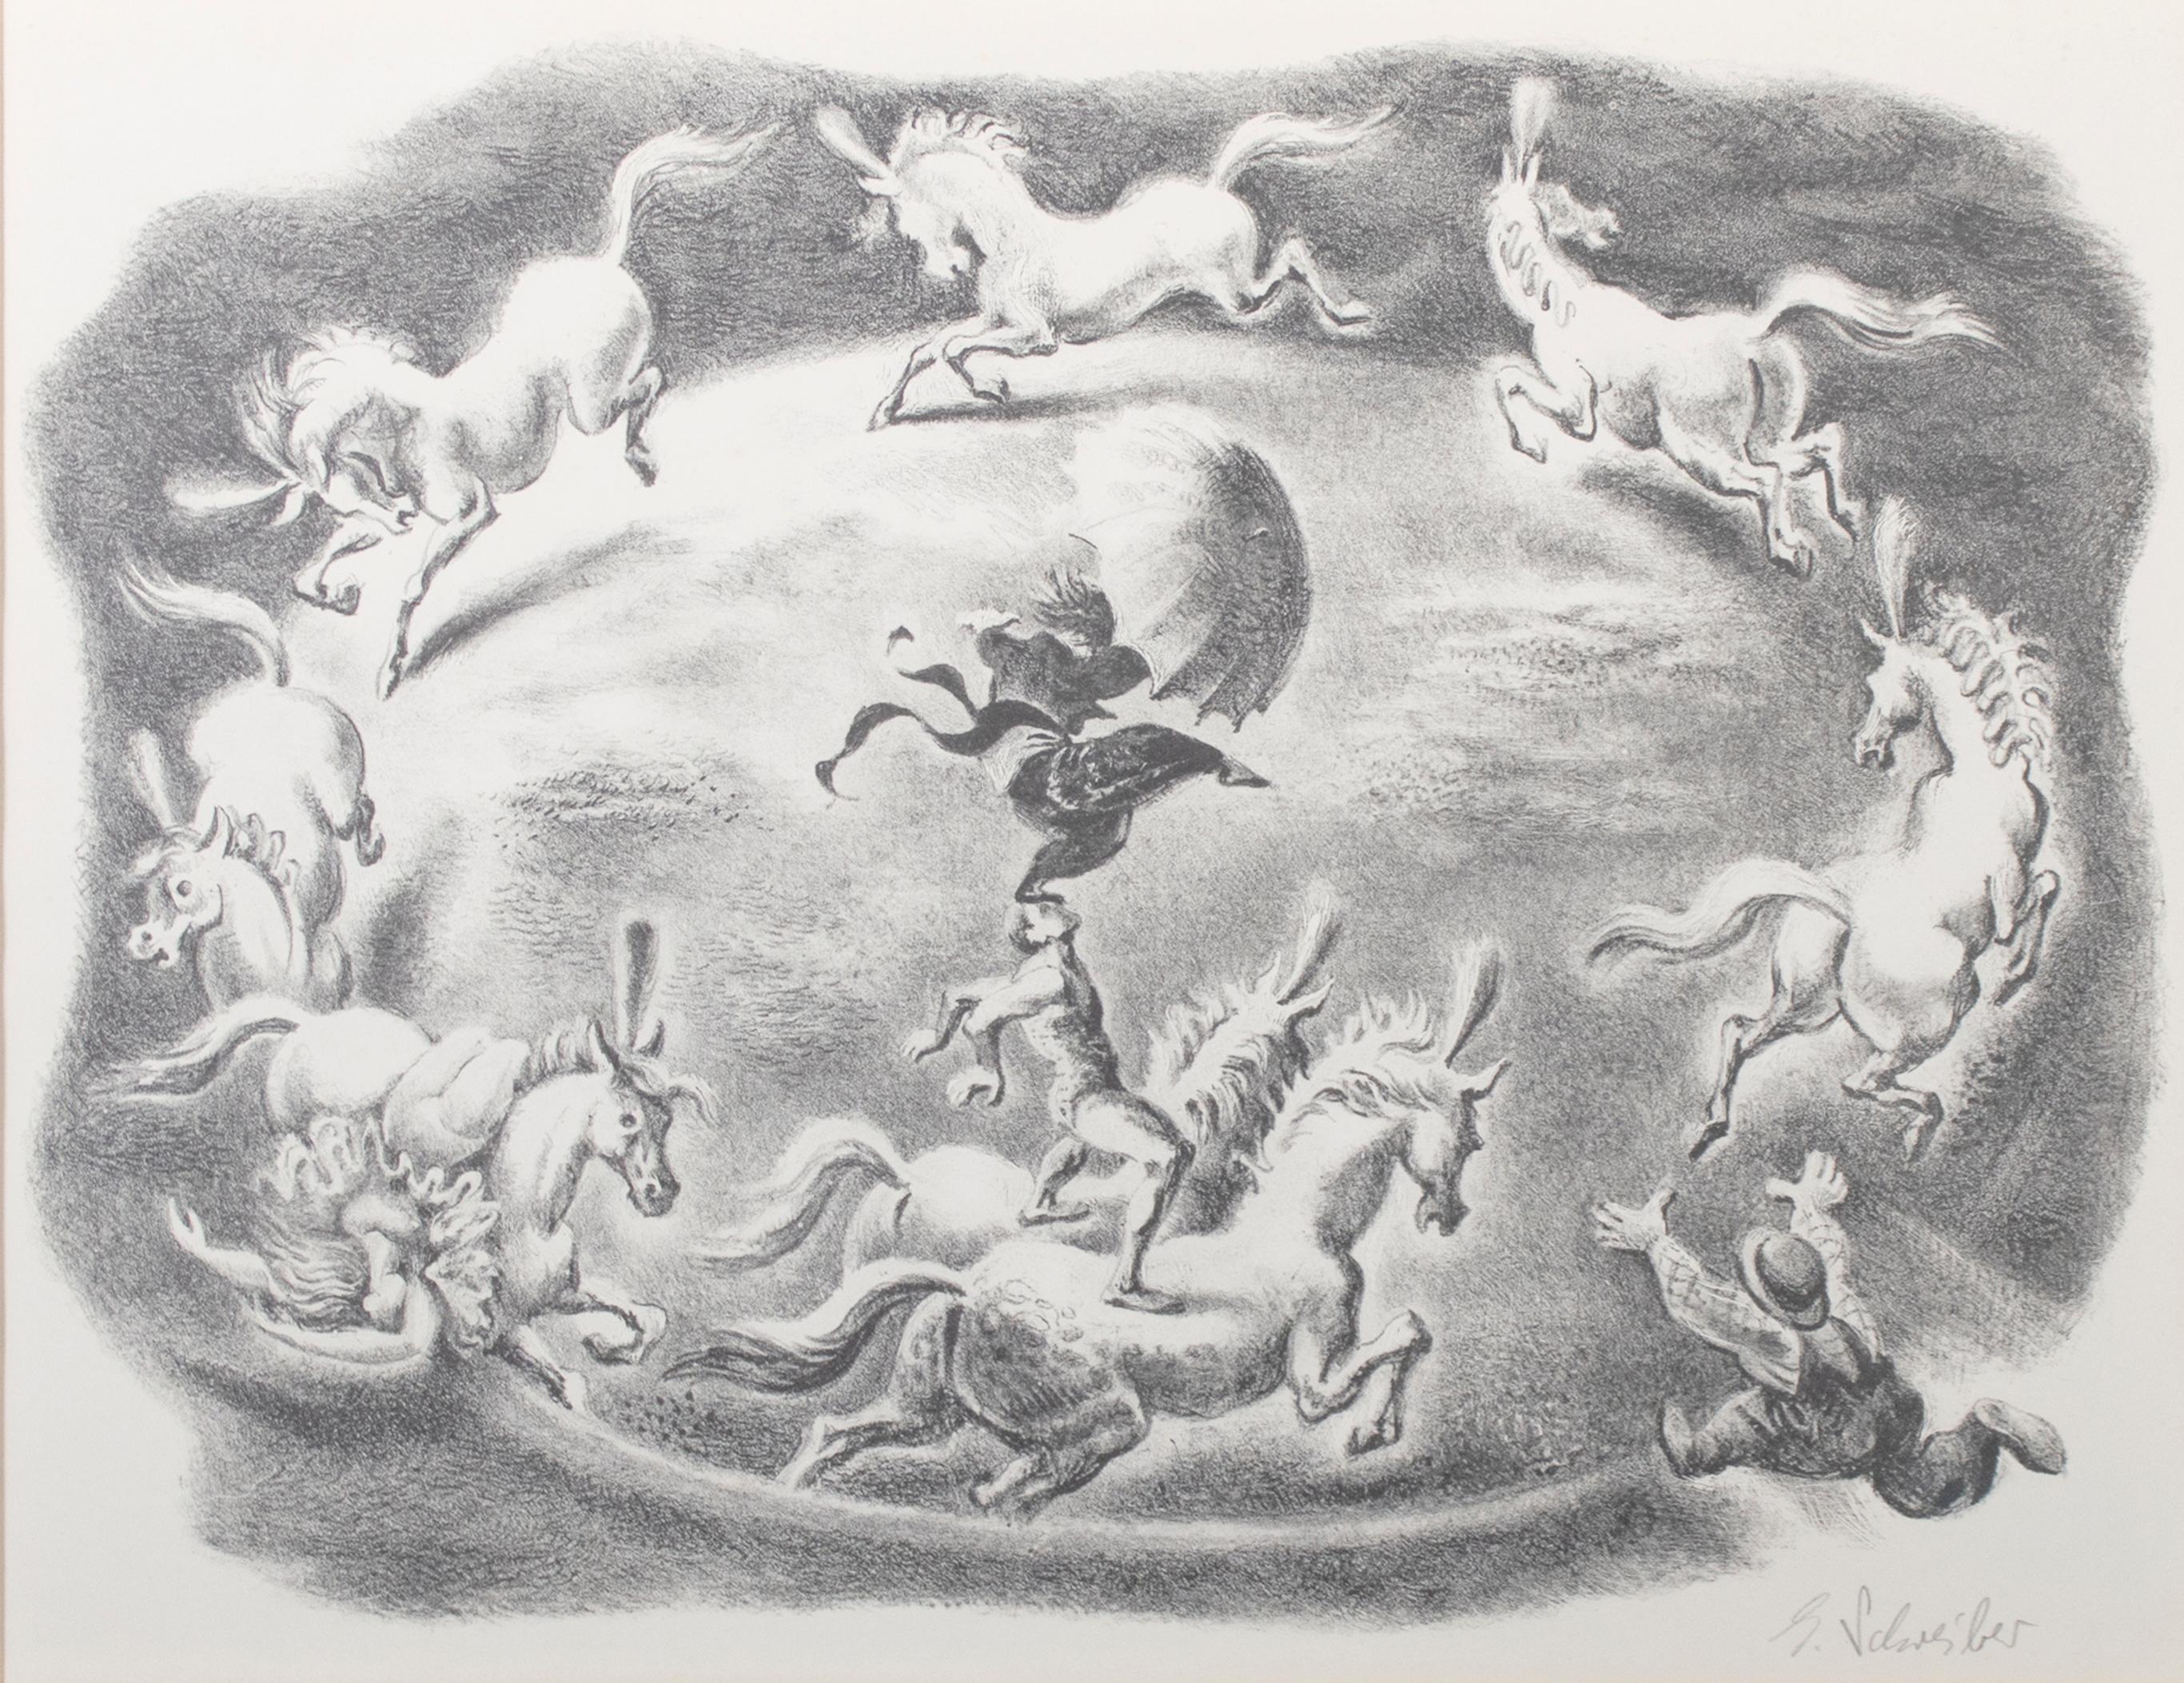 In this lithograph, Georges Schreiber focused on the thrill of the circus, taking its circular composition from the central ring. Here, acrobats perform amazing feats of agility on the backs of a whorl of galloping horses. Schreiber made several